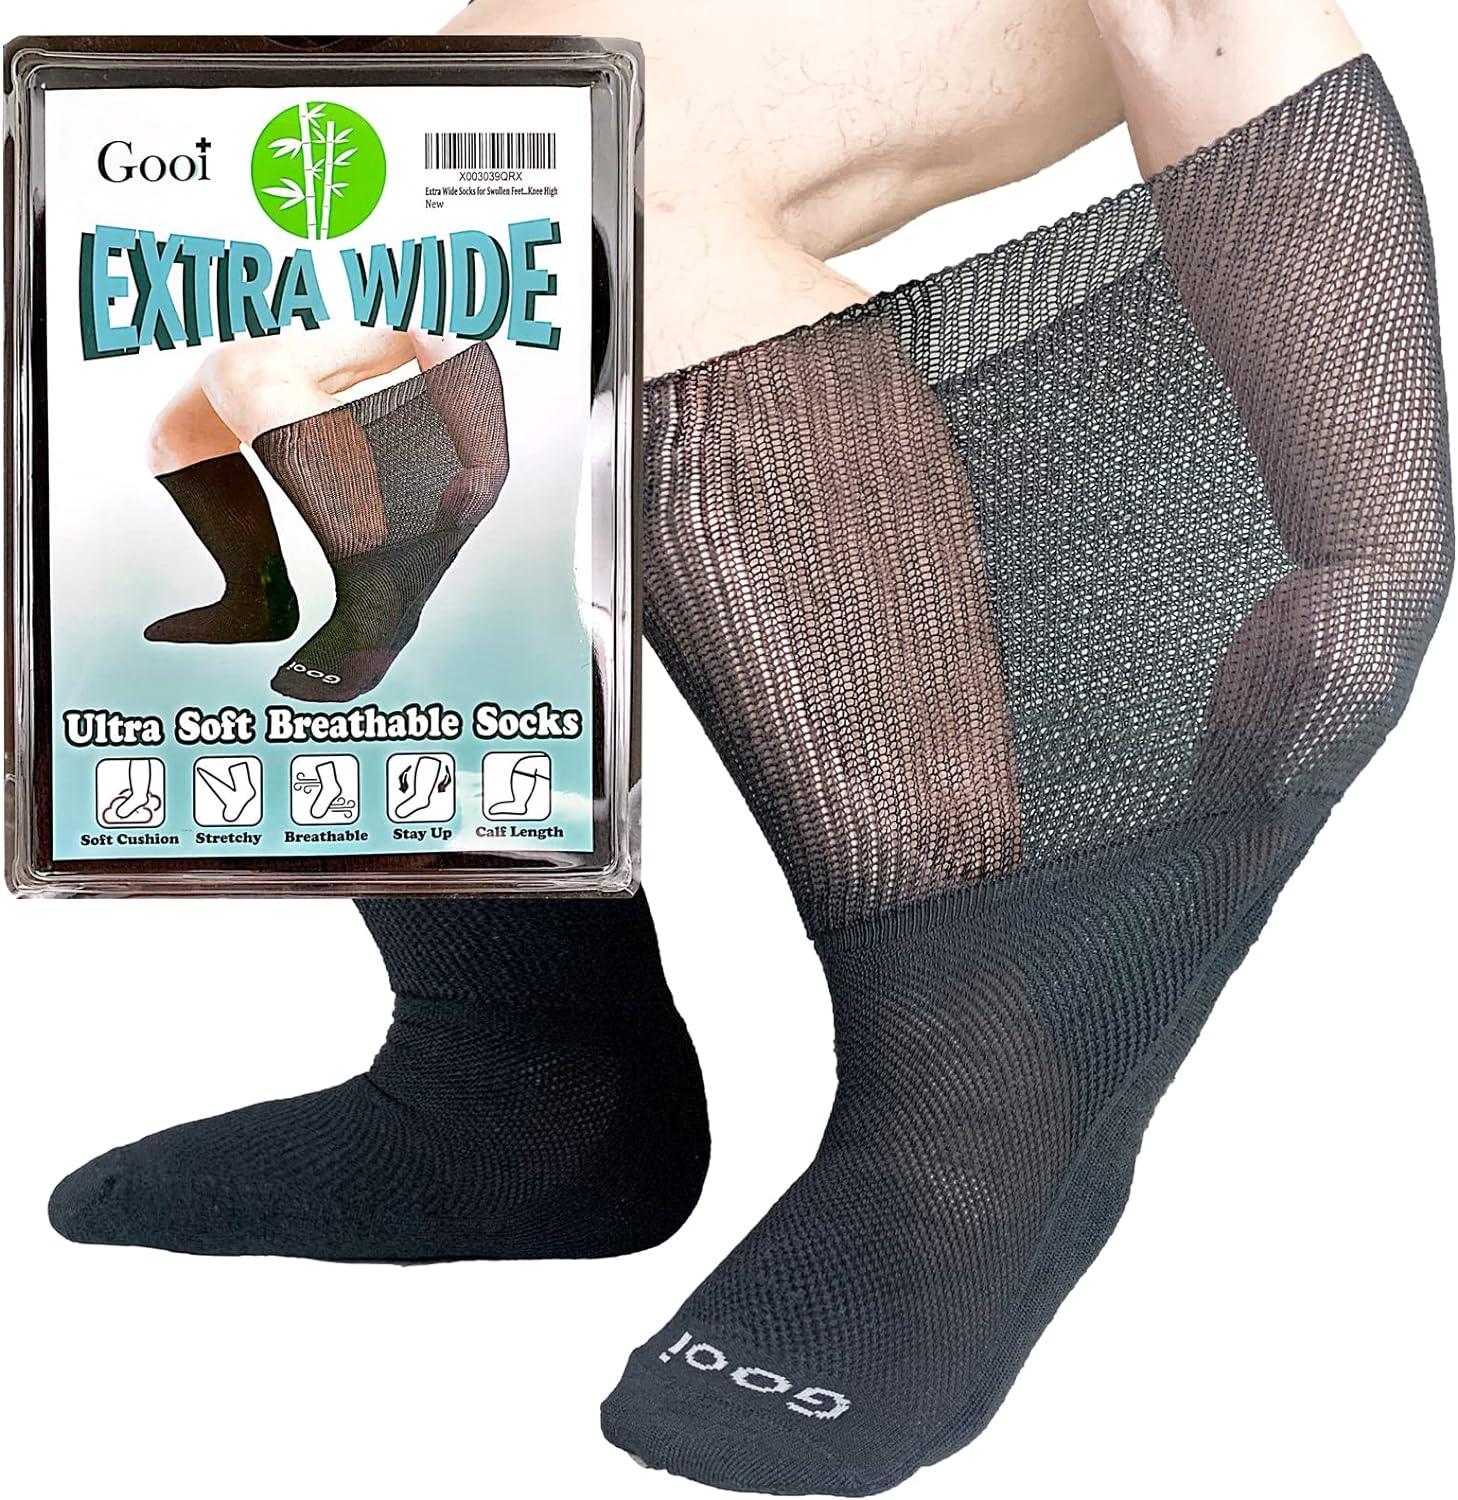 Extra Wide Neuropathy Pain Relief Socks for Swollen Feet Soft Stretches up to 30" Diabetics for Men Women 10-13 13-15 Warm Breathable Non Binding Loose Top Bariatric Edema Cast Over The Calf Plus Size Knee High Socks Extra-Wide Gooi